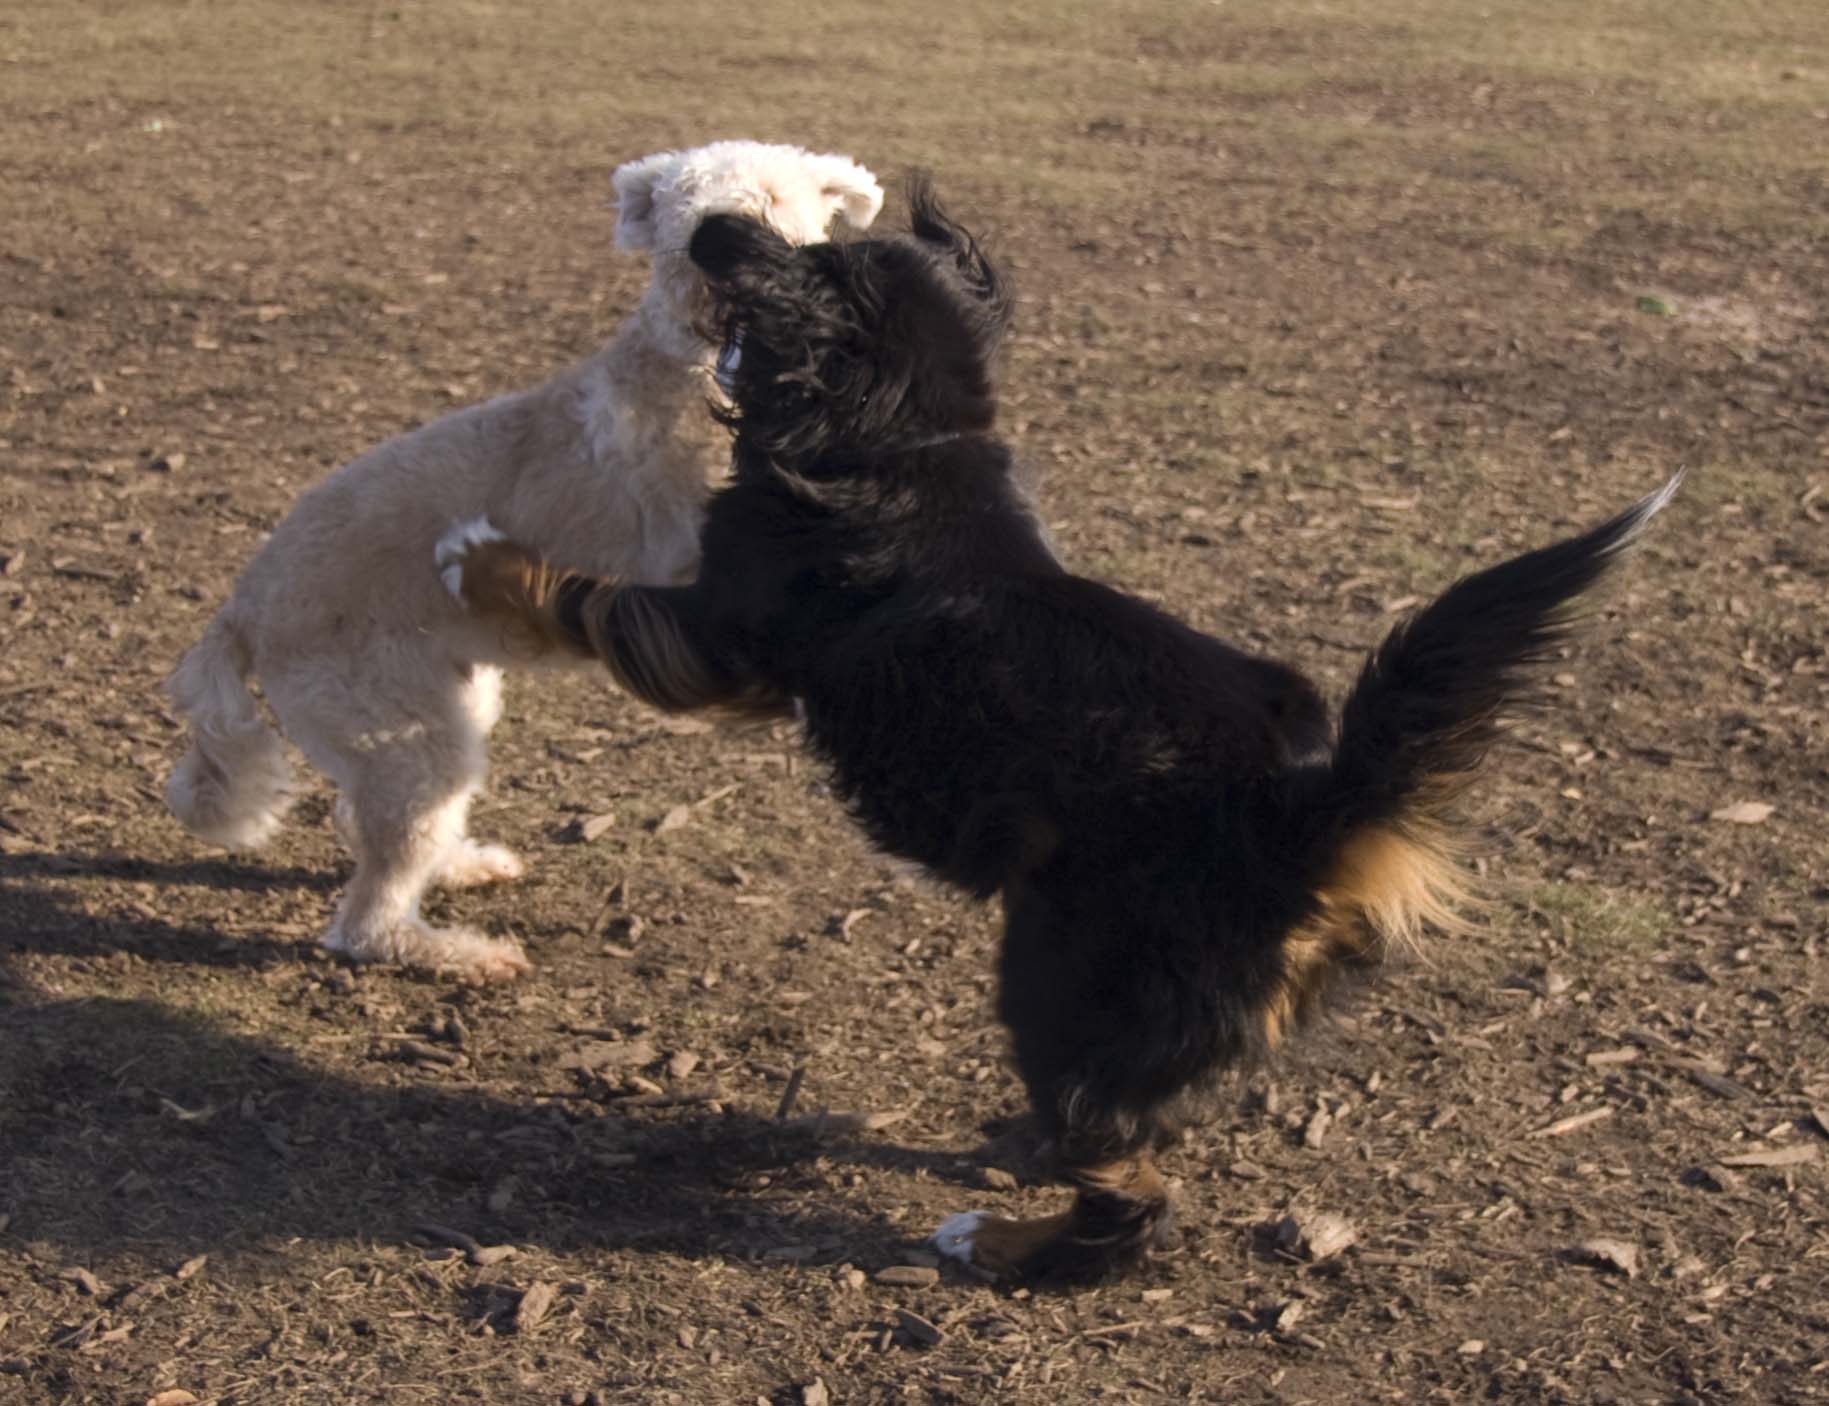 the two dogs are playing with each other